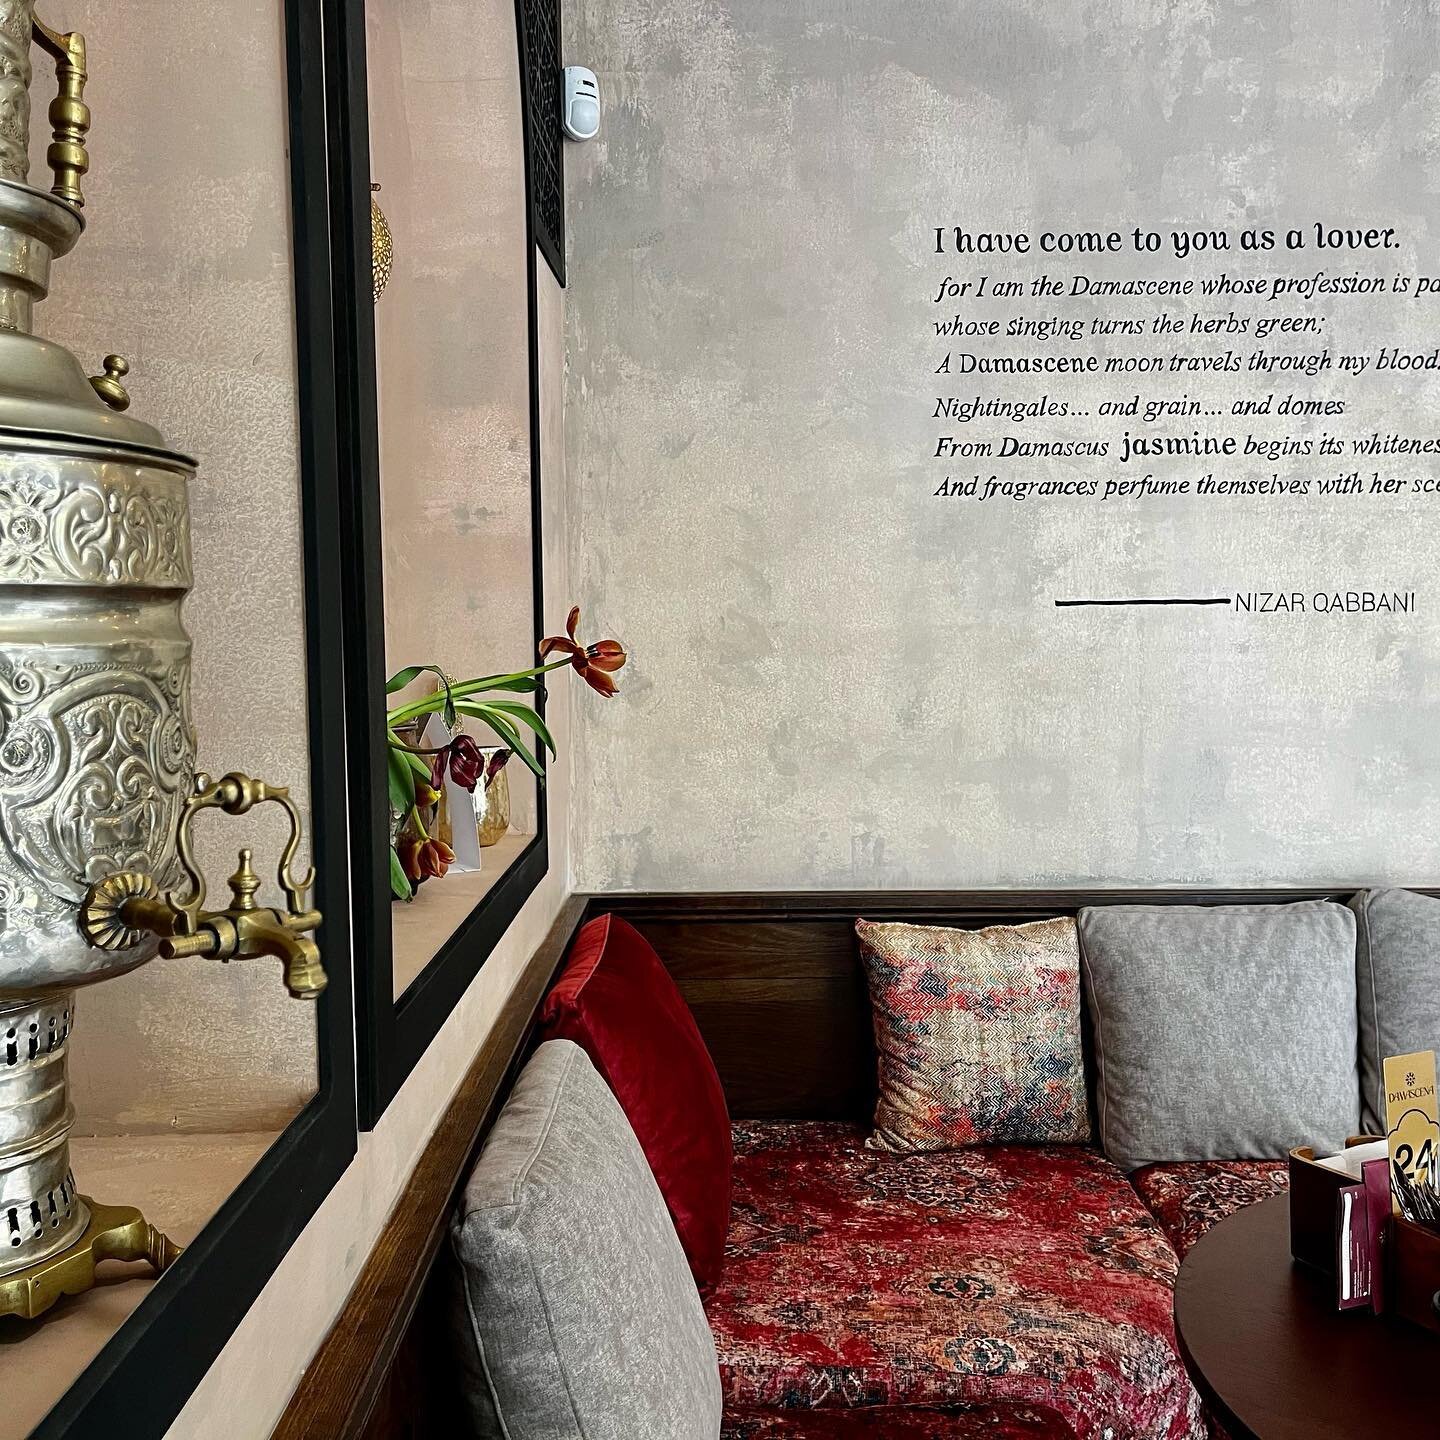 Have you popped into our latest completed restaurant design project in Birmingham city centre yet? 

@damascena_uk on temple row is now open and has a stunning Syrian menu to try! Taking inspiration from the ancient charm of Damascus, the design feat